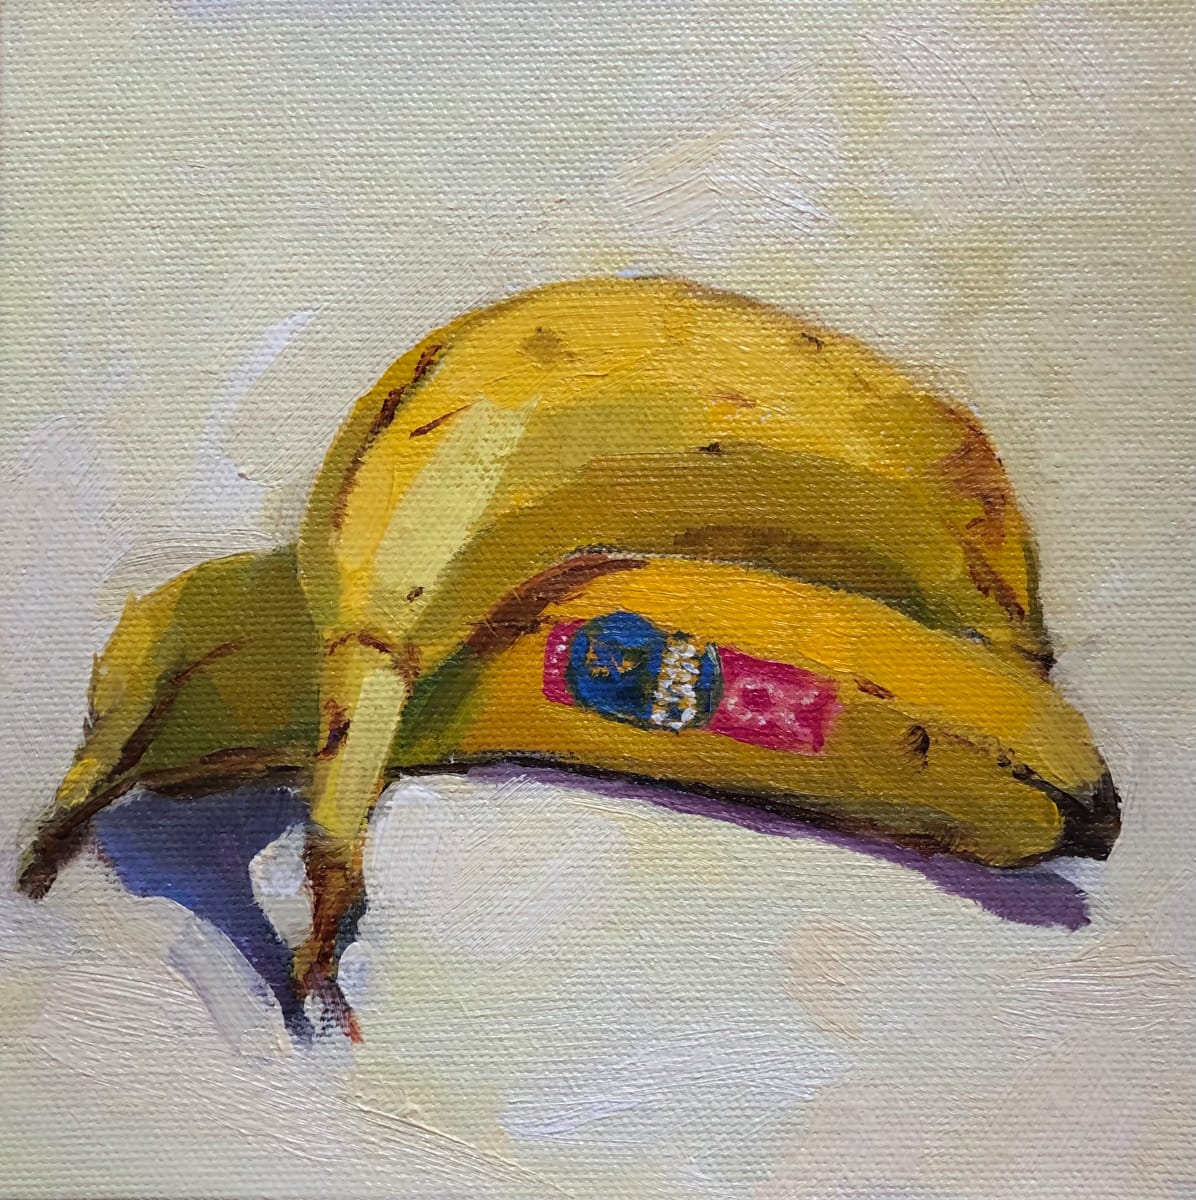 Bananas by Cary Galbraith  Image: ​Yes, they are good for you. Bringing you potassium, vitamin C, B-6, and Magnesium. A pair of Chiquita bananas with a Breast Cancer Awareness sticker. October is Breast Cancer Awareness month. This was painted on October 21, 2021.